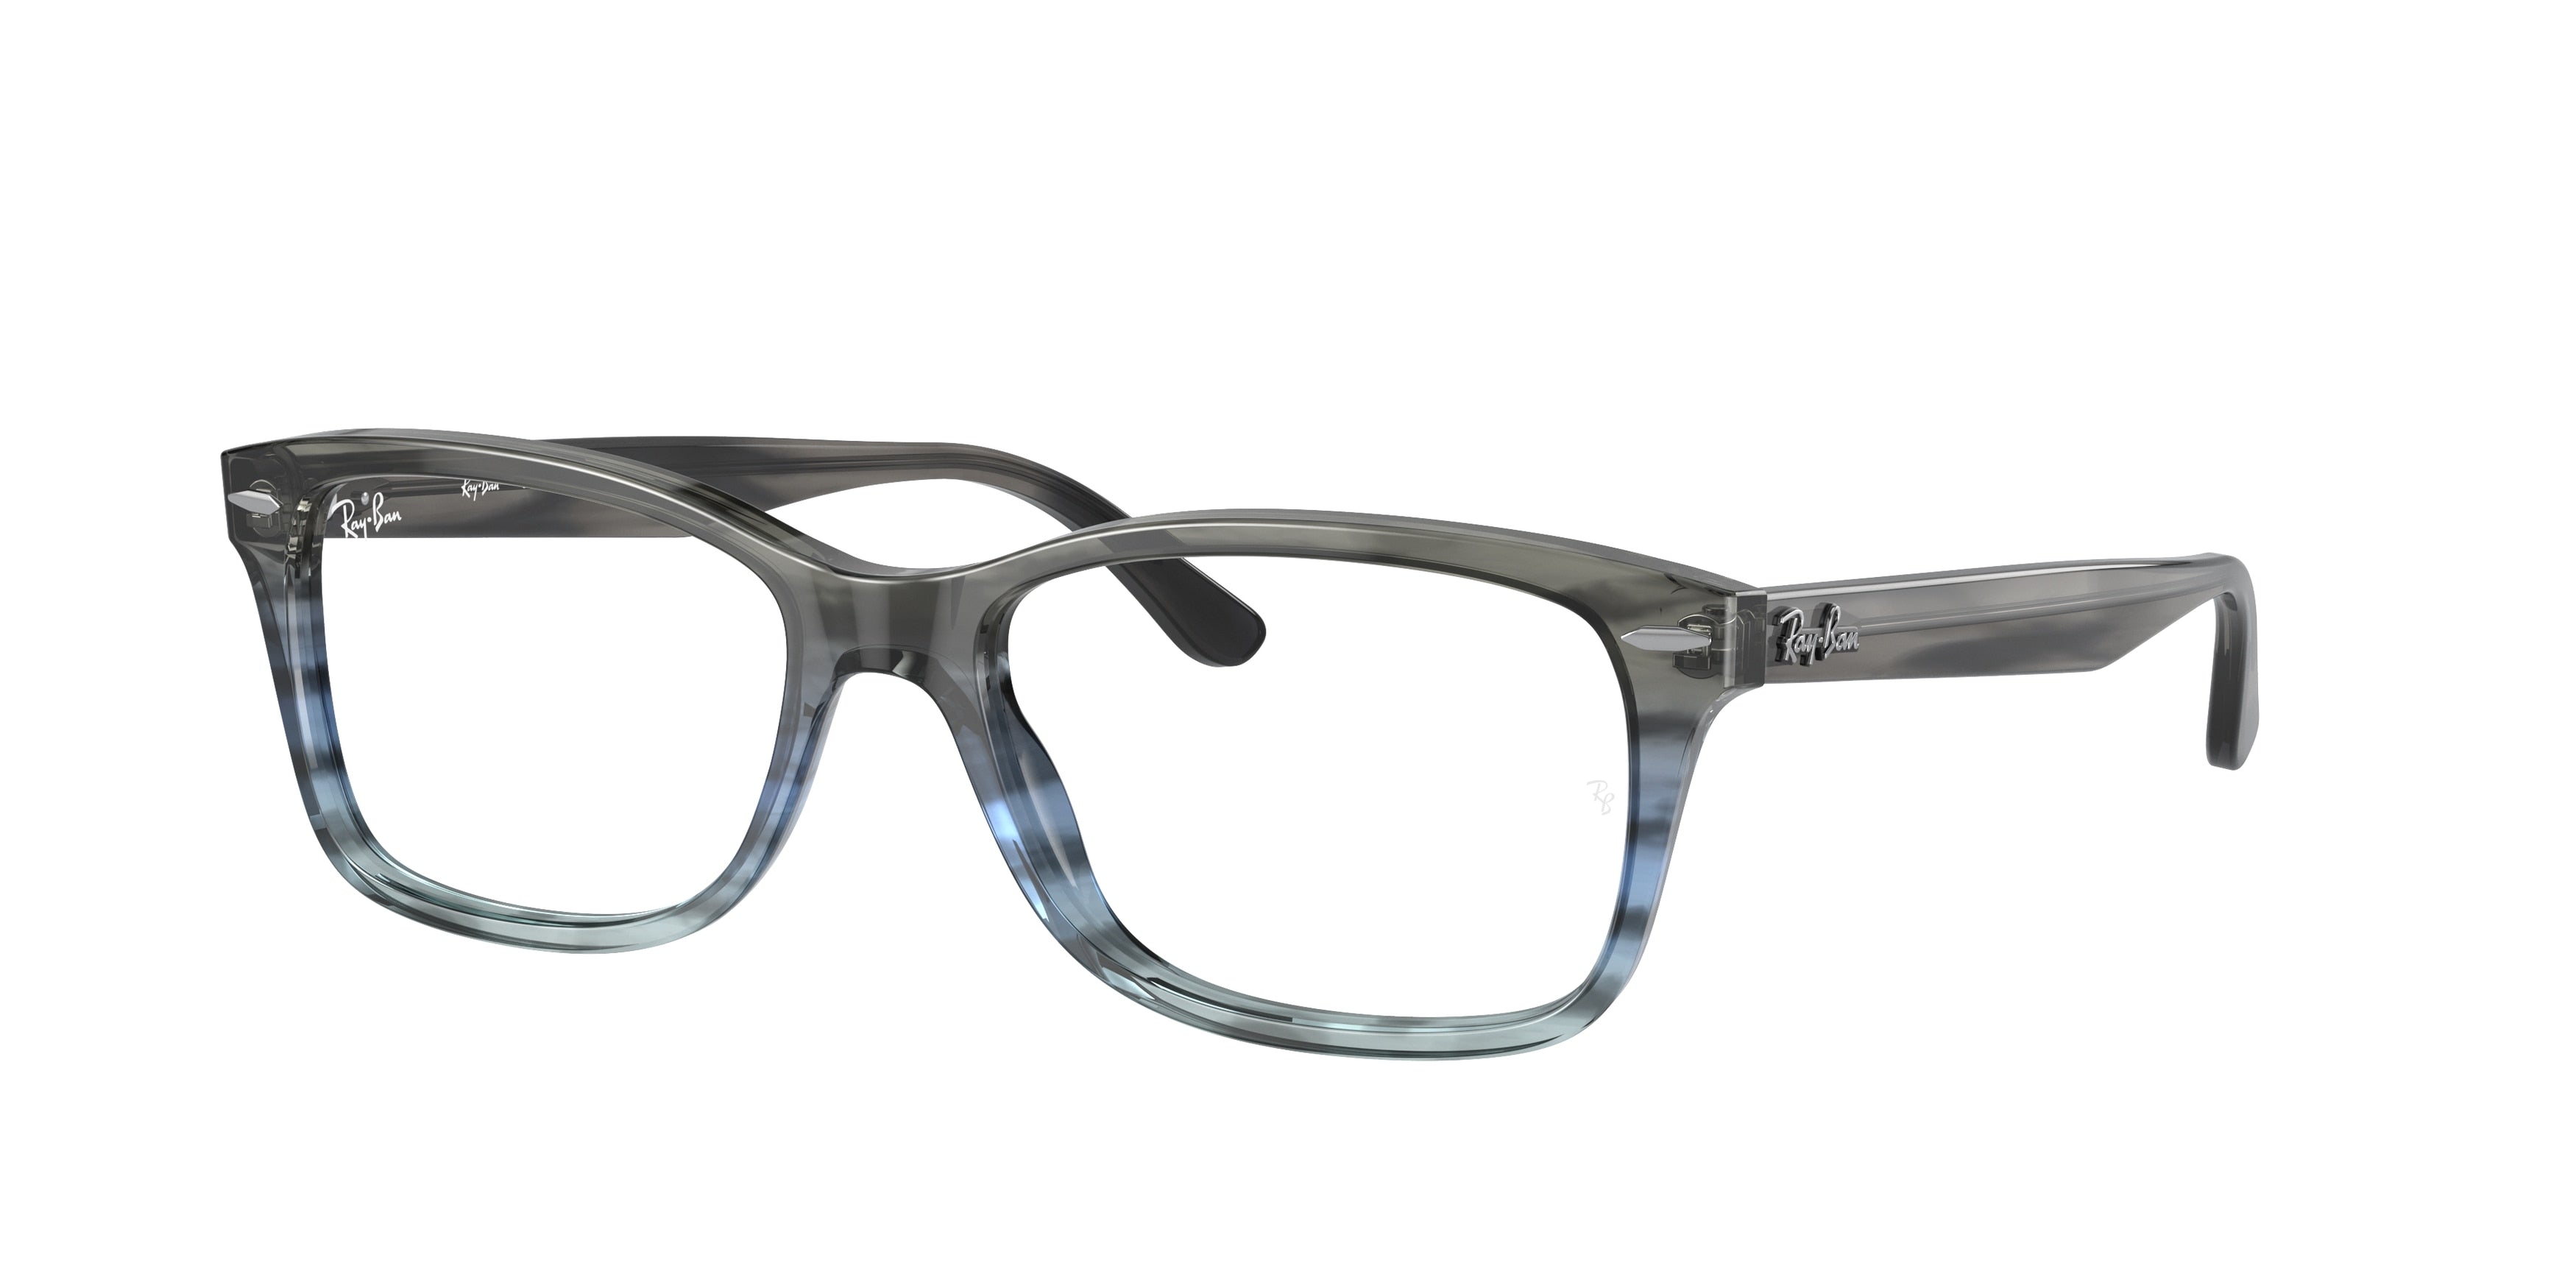 Ray-Ban Optical RX5428 Square Eyeglasses  8254-Striped Grey & Blue 55-145-17 - Color Map Blue